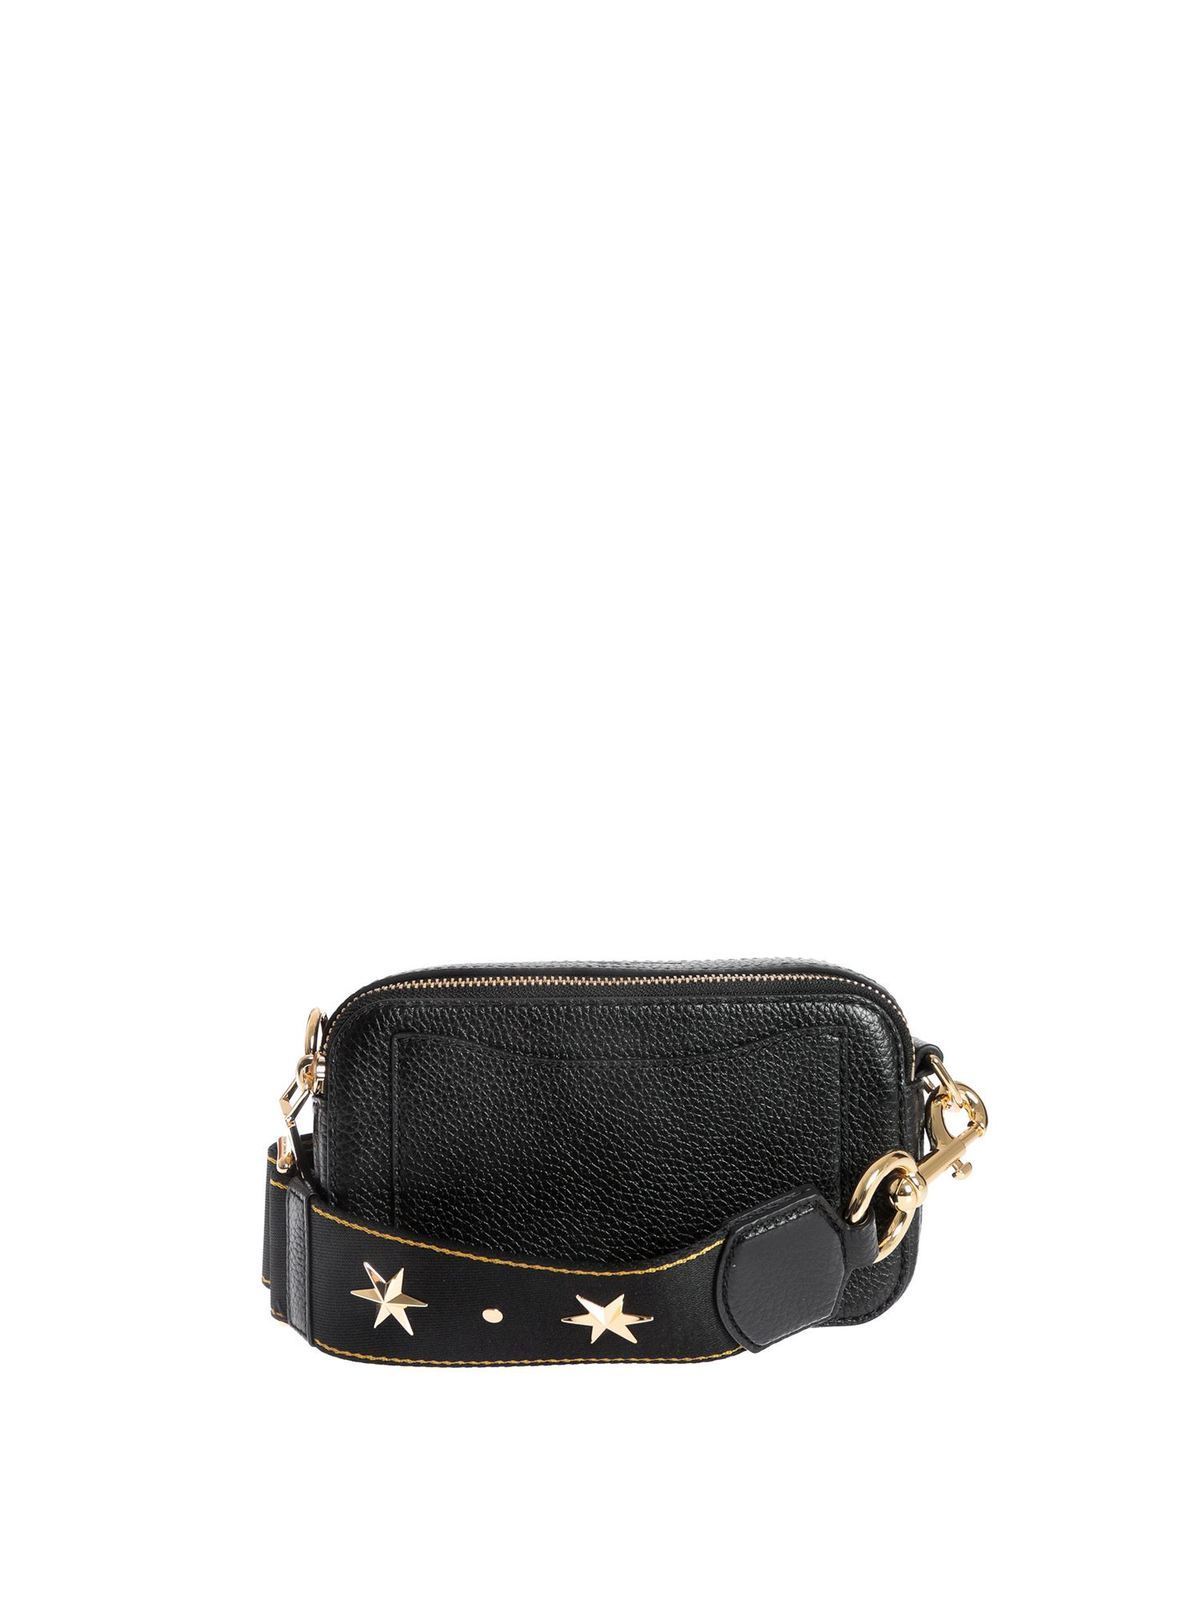 Cross body bags Marc Jacobs - Softshot crossbody bag in black and gold -  H113L01SP21002